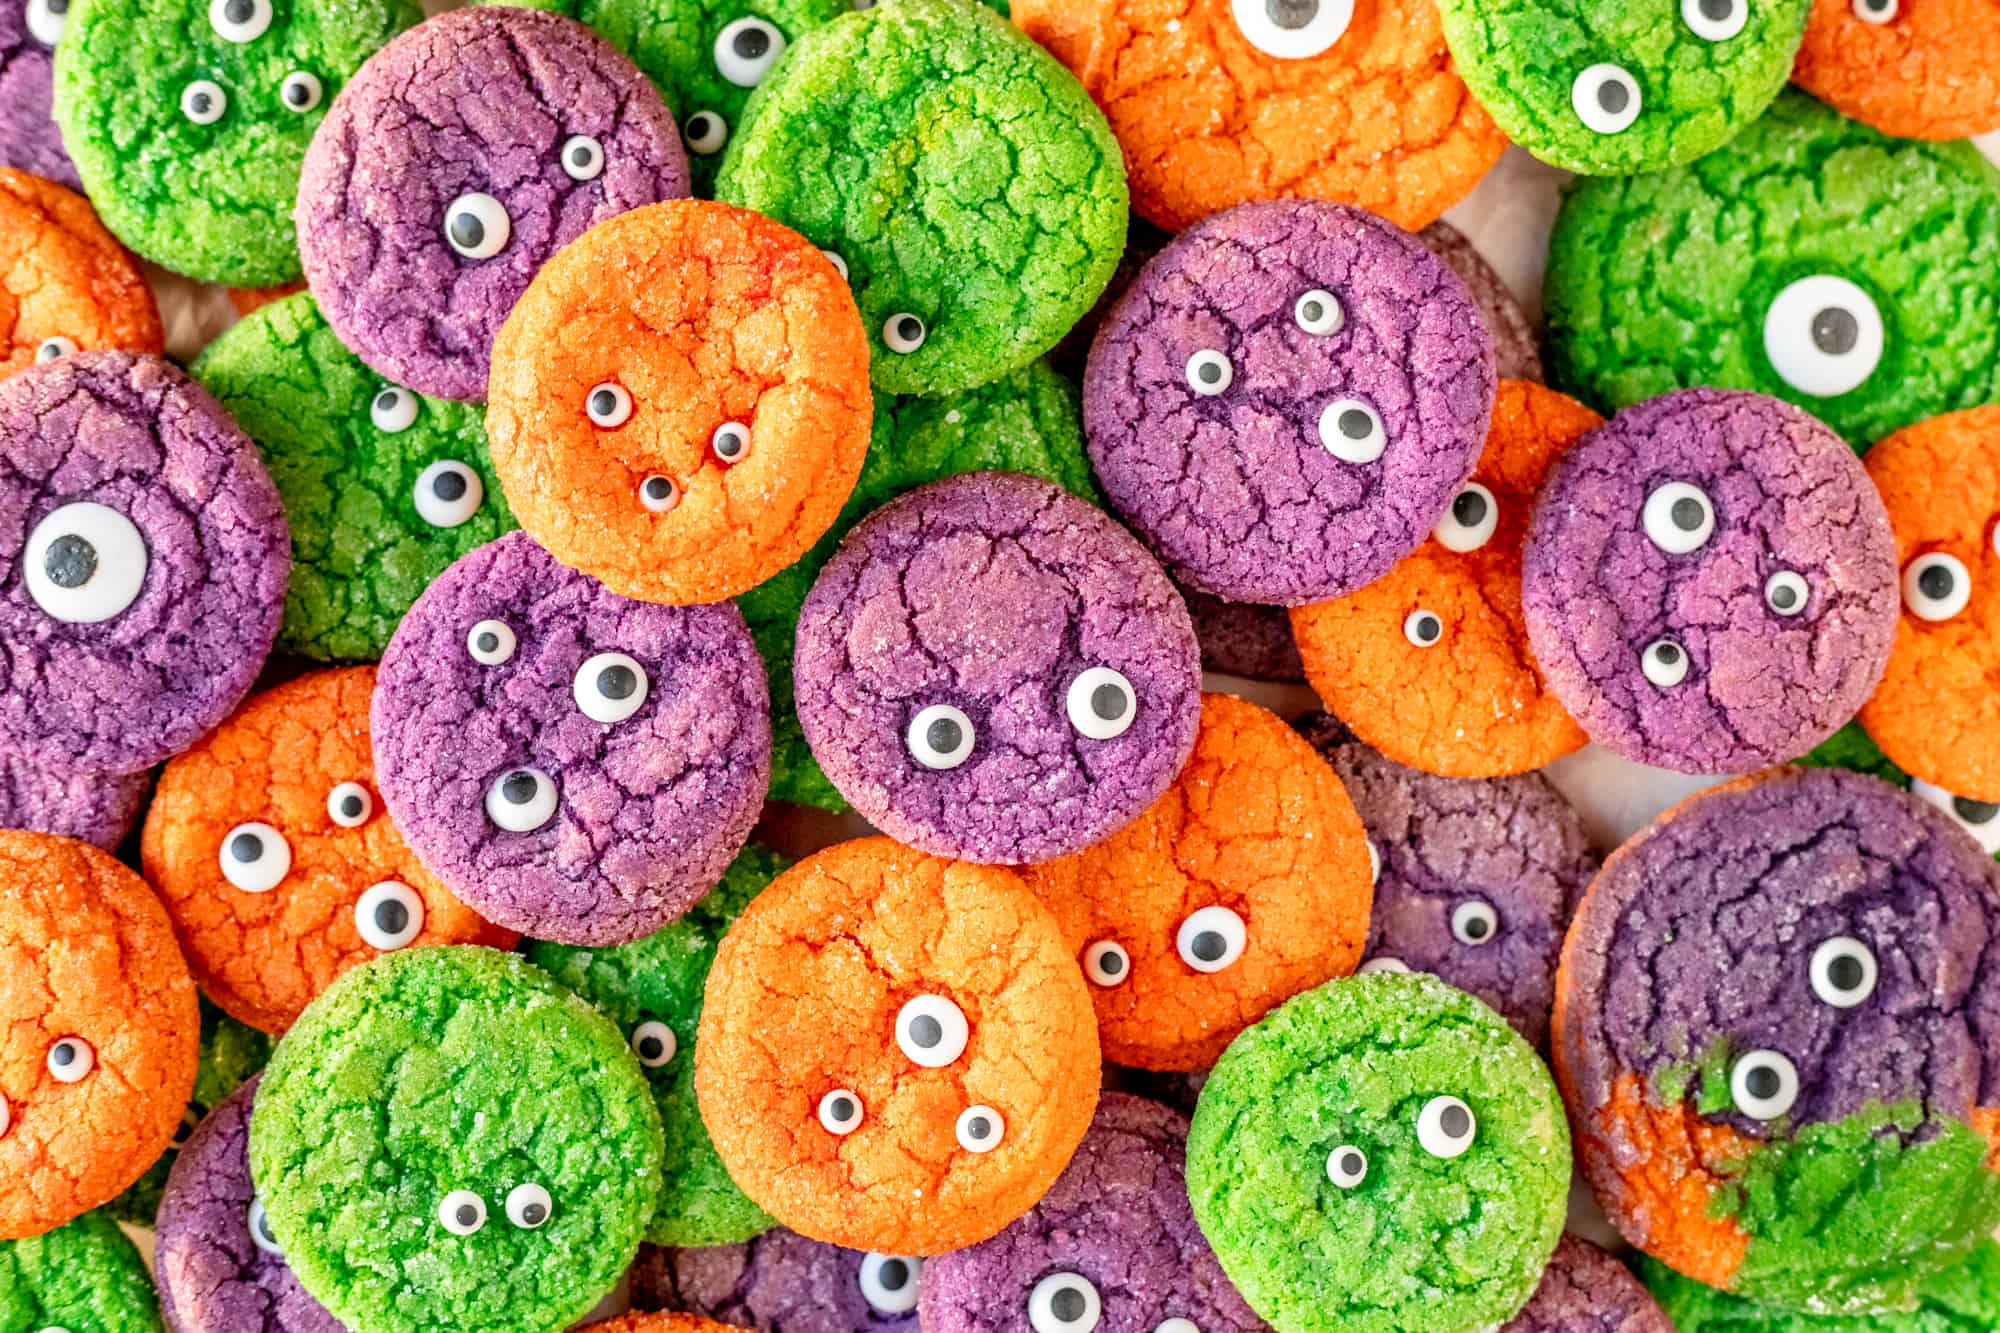 orange purple and green monster sugar cookies with candy eyeballs in a pile